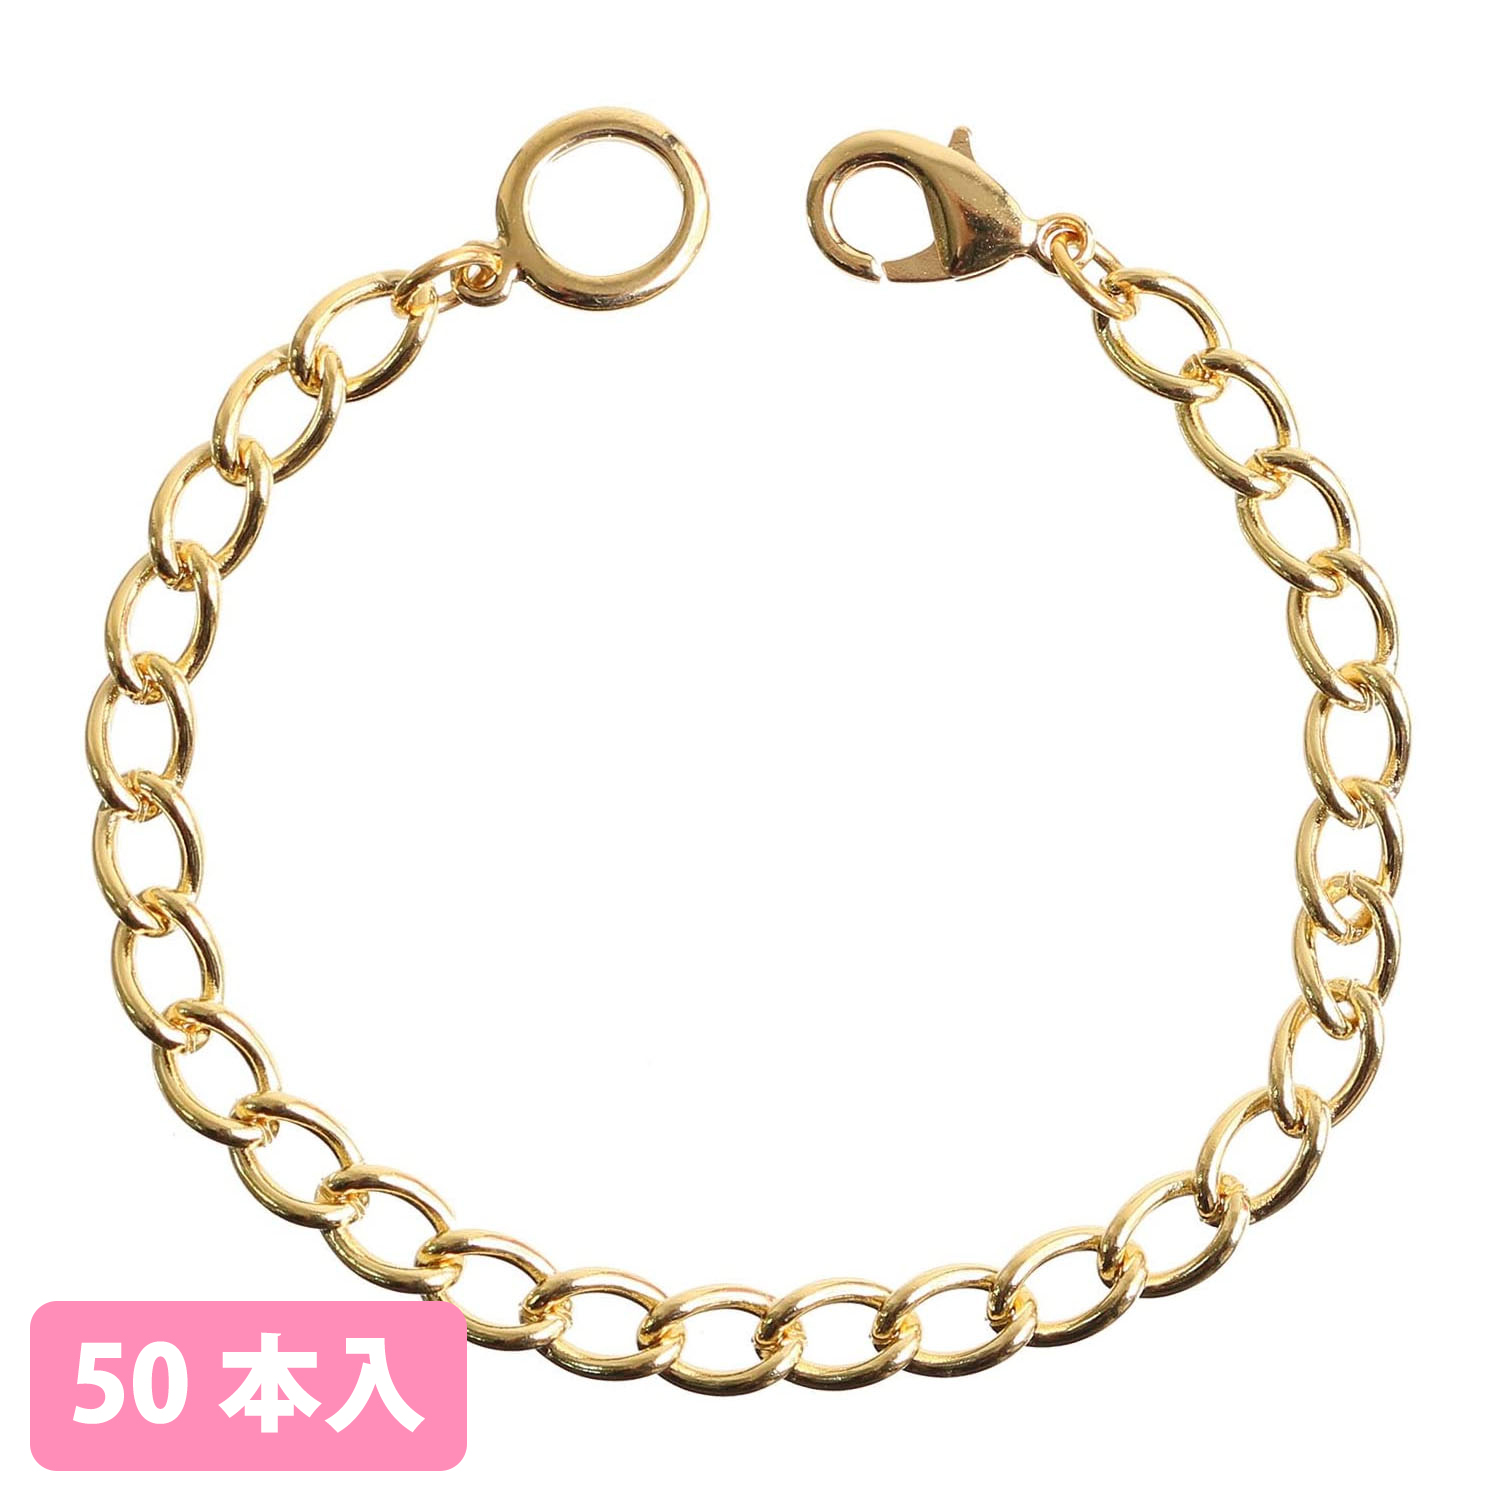 A8-65~67-50 Chains for Bag Charms Length 20cm 50pcs (pack)